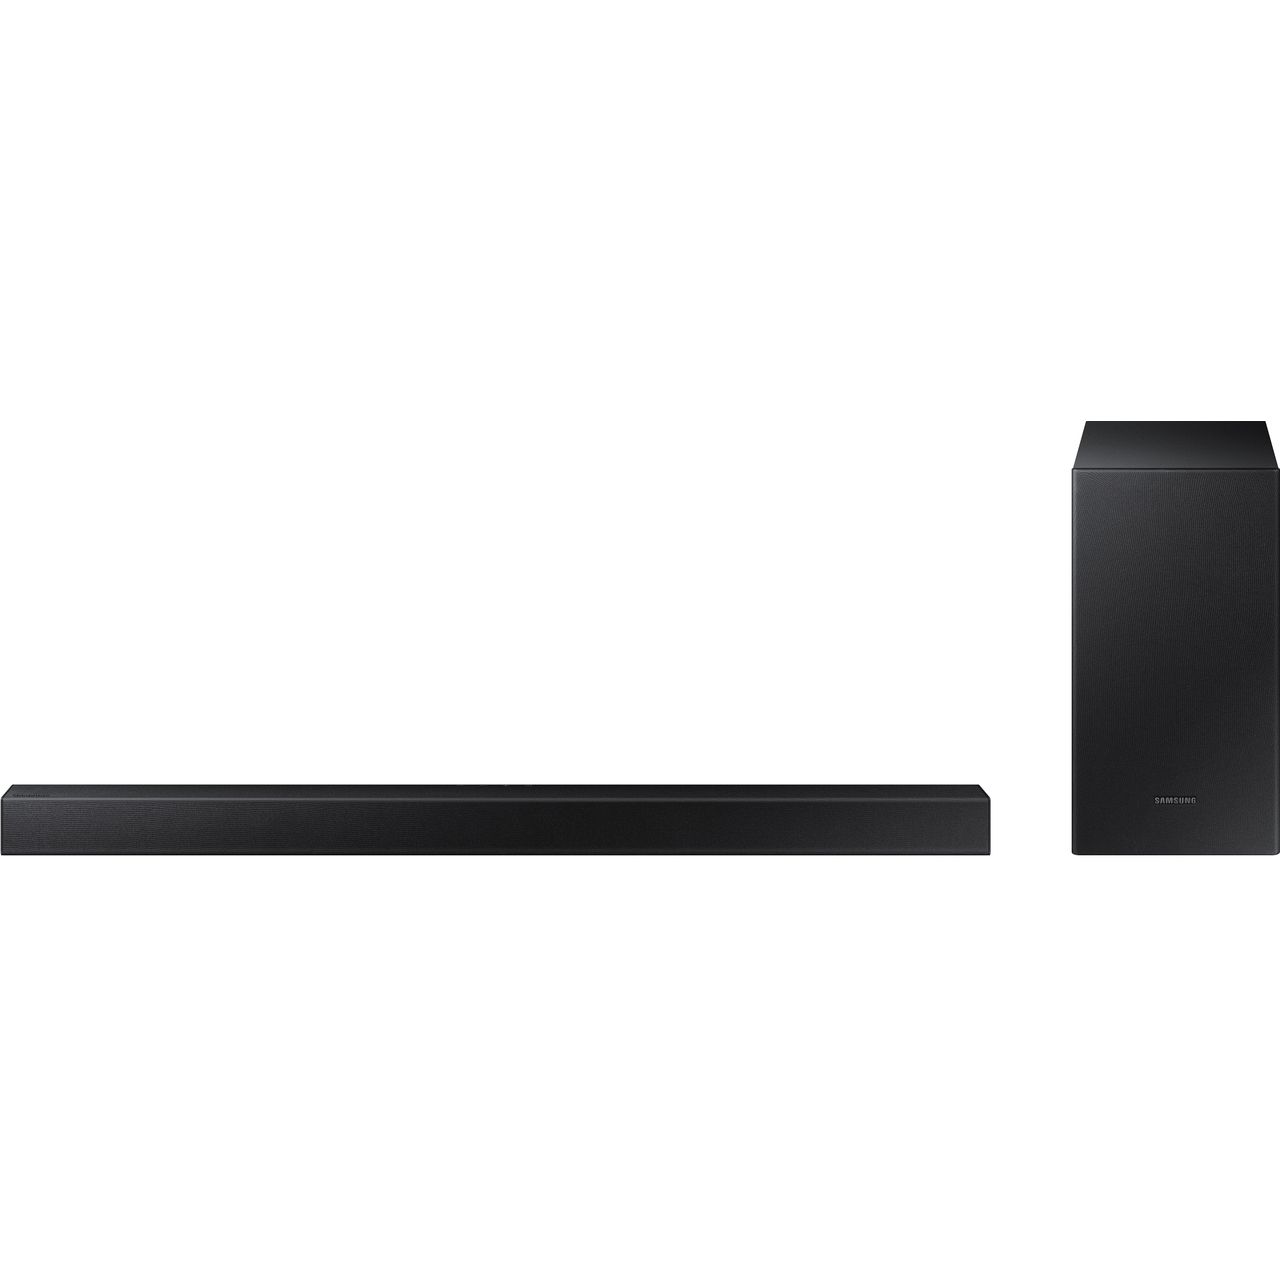 Samsung HW-T420 Bluetooth 2.1 Soundbar with Wired Subwoofer Review